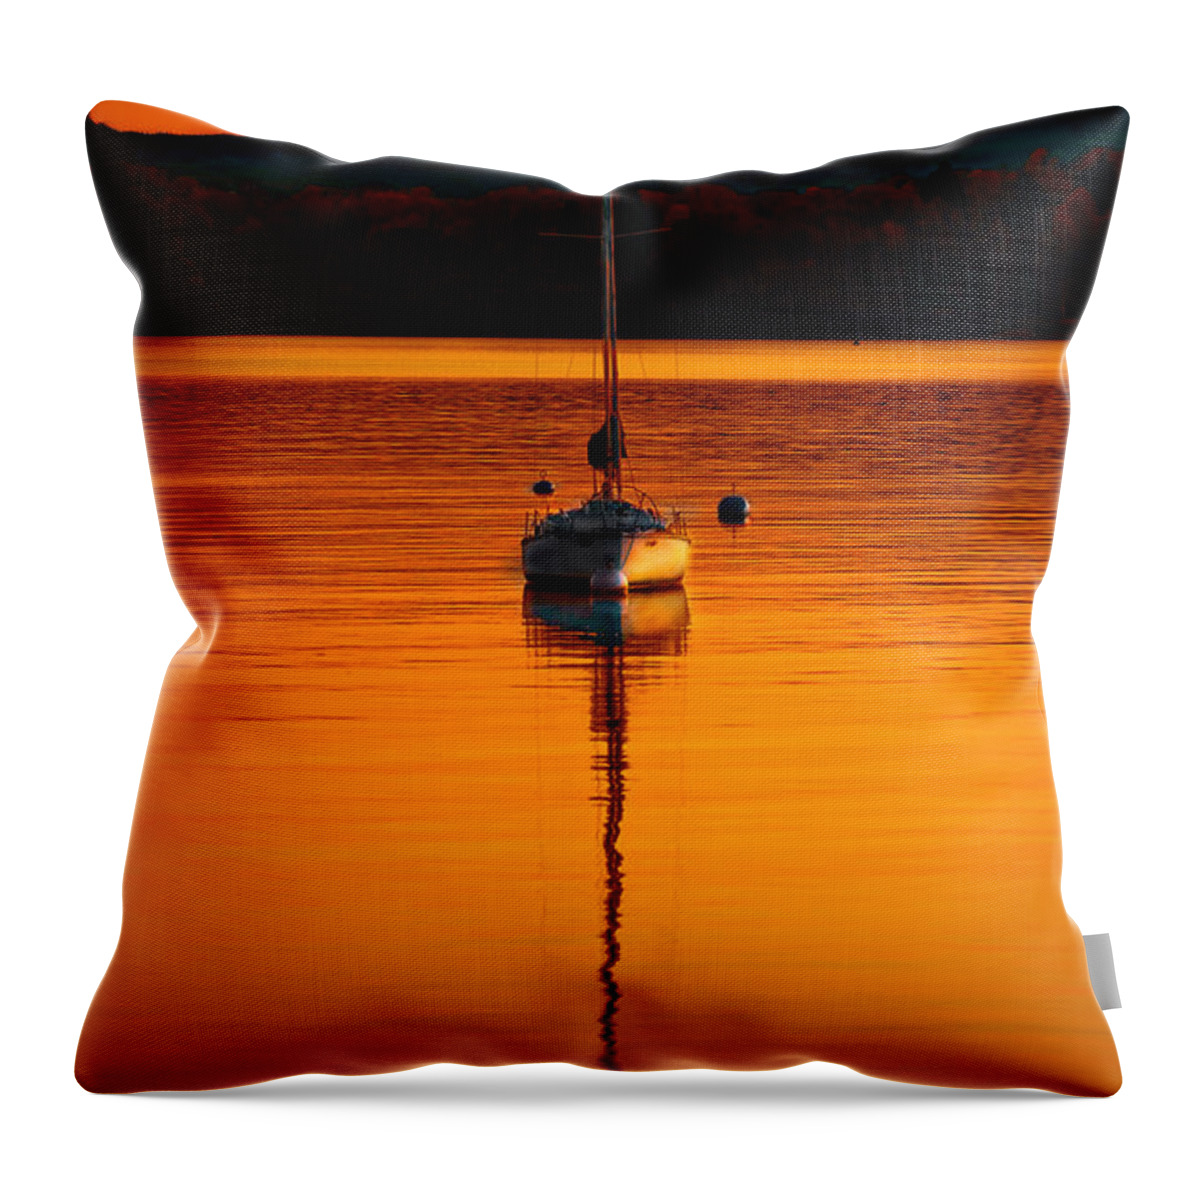 Windermere Throw Pillow featuring the photograph Nuclear Sunset by Meirion Matthias